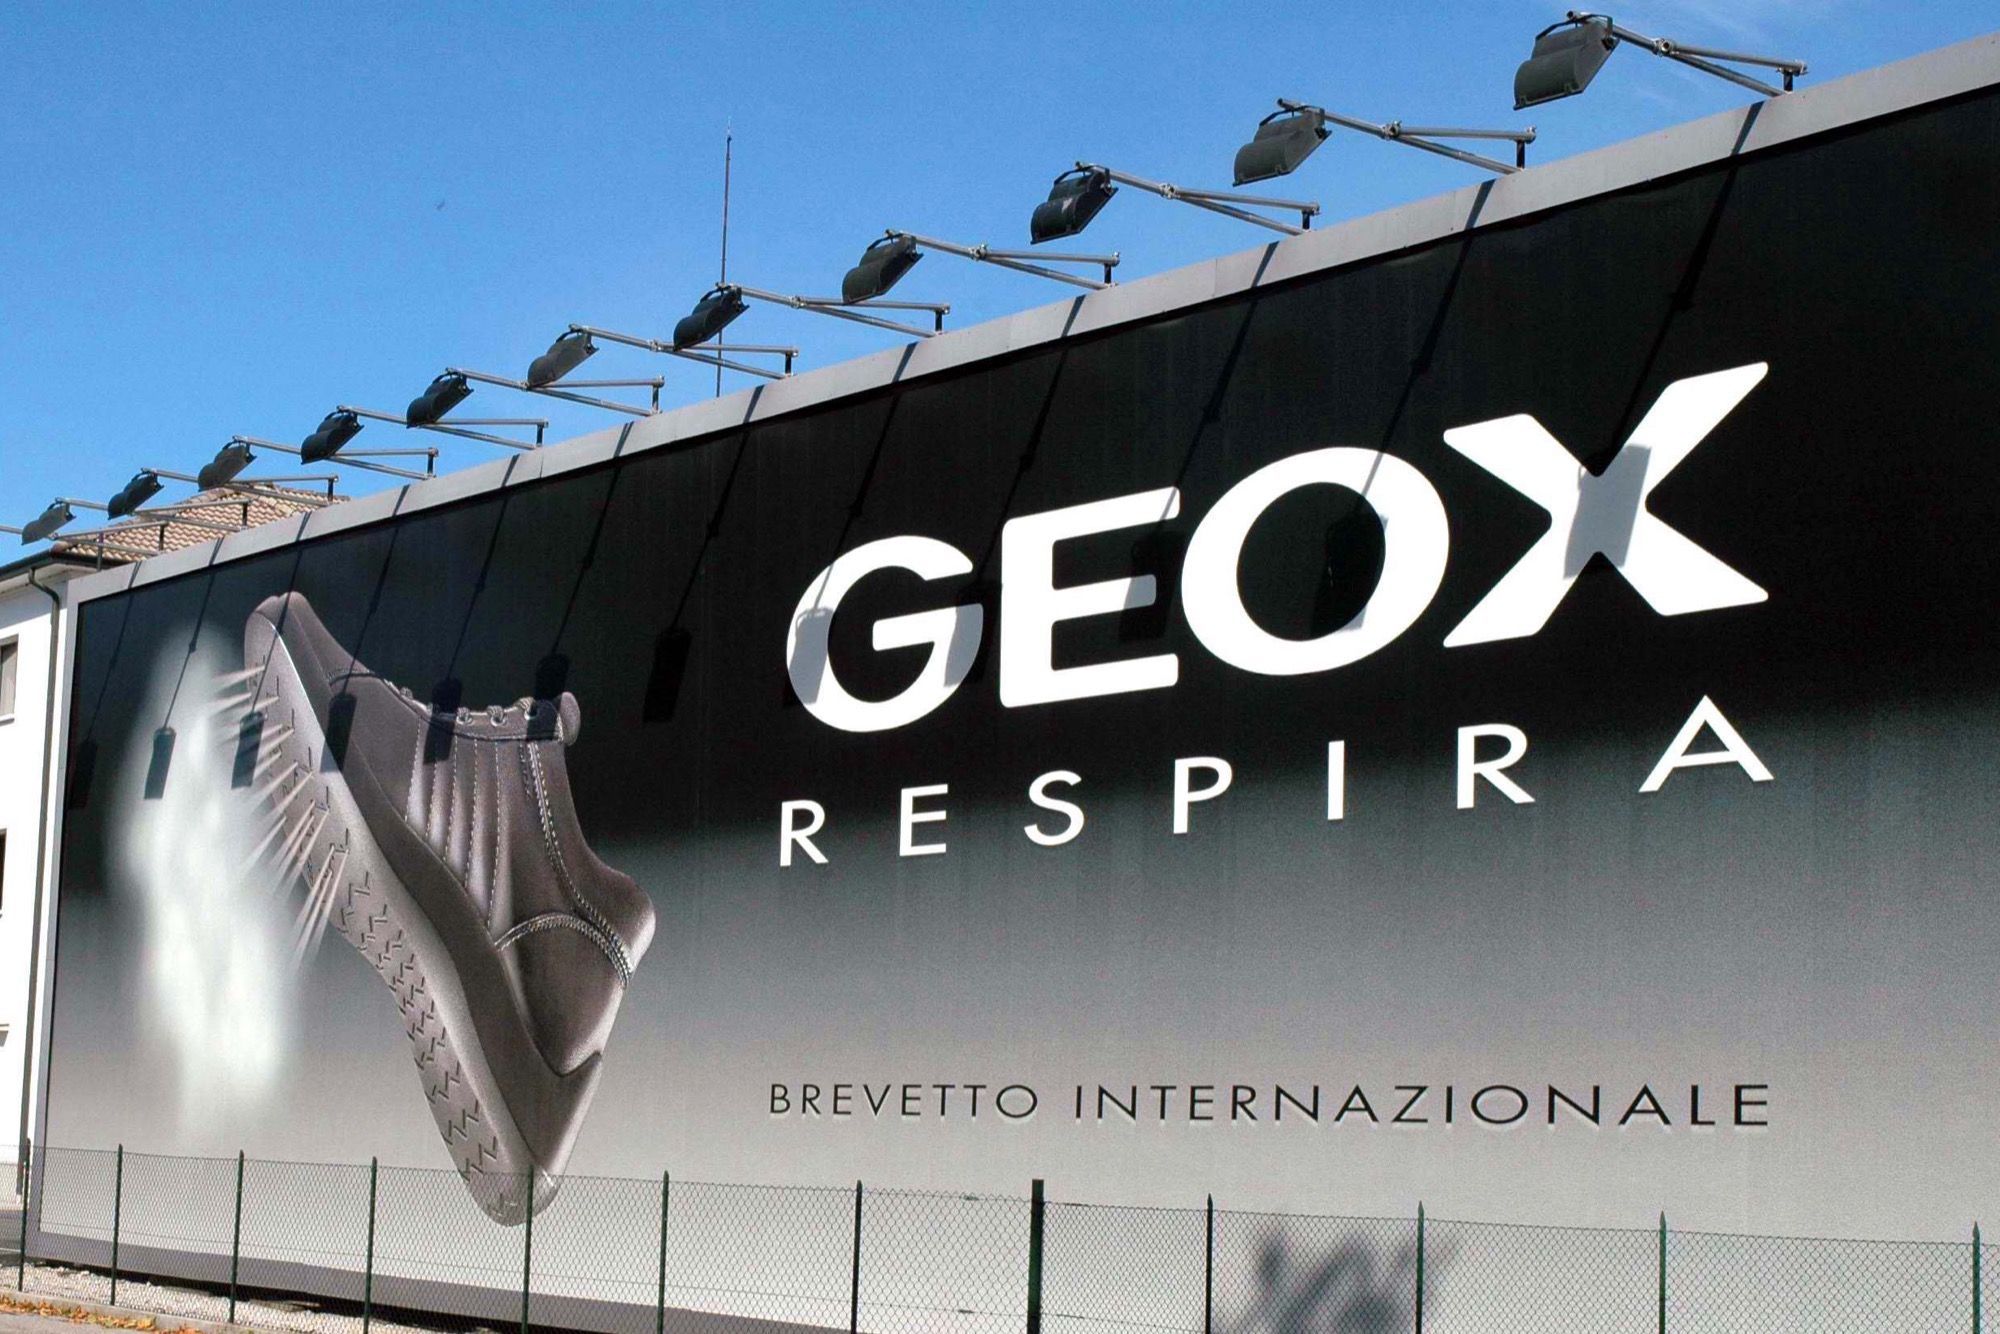 What happened to Geox, the brand of shoe breathes"